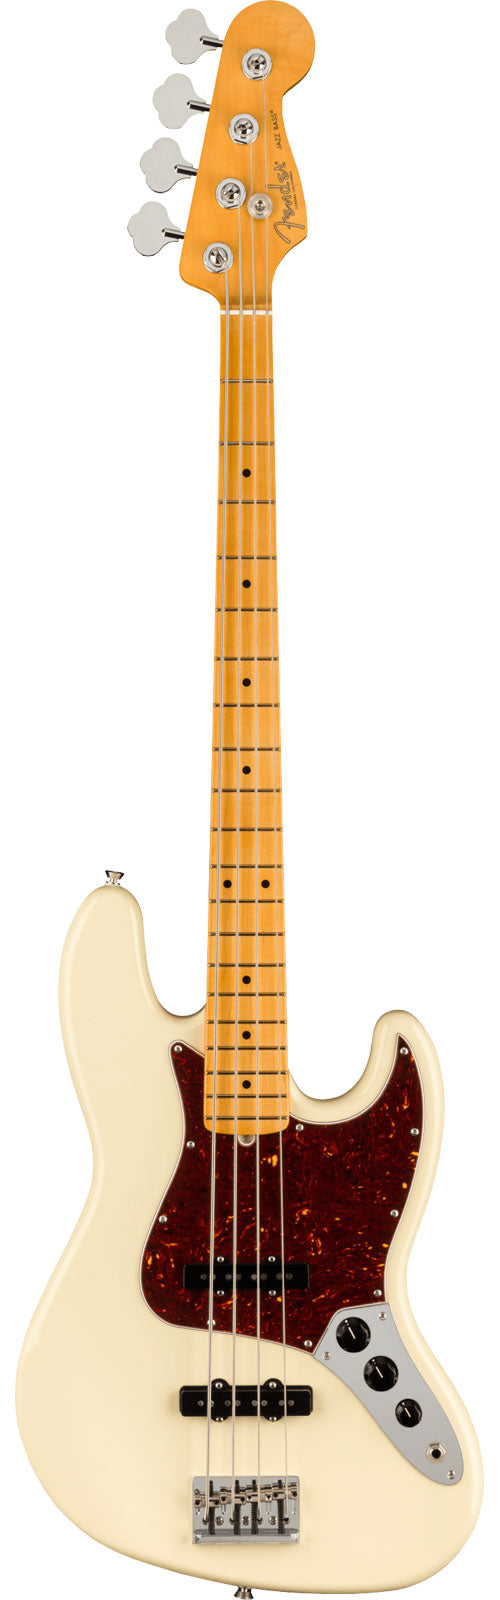 FENDER AMERICAN PROFESSIONAL II JAZZ BASS ELECTRIC GUITAR WITH MAPLE FINGERBOARD&2 SINGLE-COIL PICKUPS - OLYMPIC WHITE, FENDER, BASS GUITAR, fender-bass-guitar-fen-f03-019-3972-705, ZOSO MUSIC SDN BHD